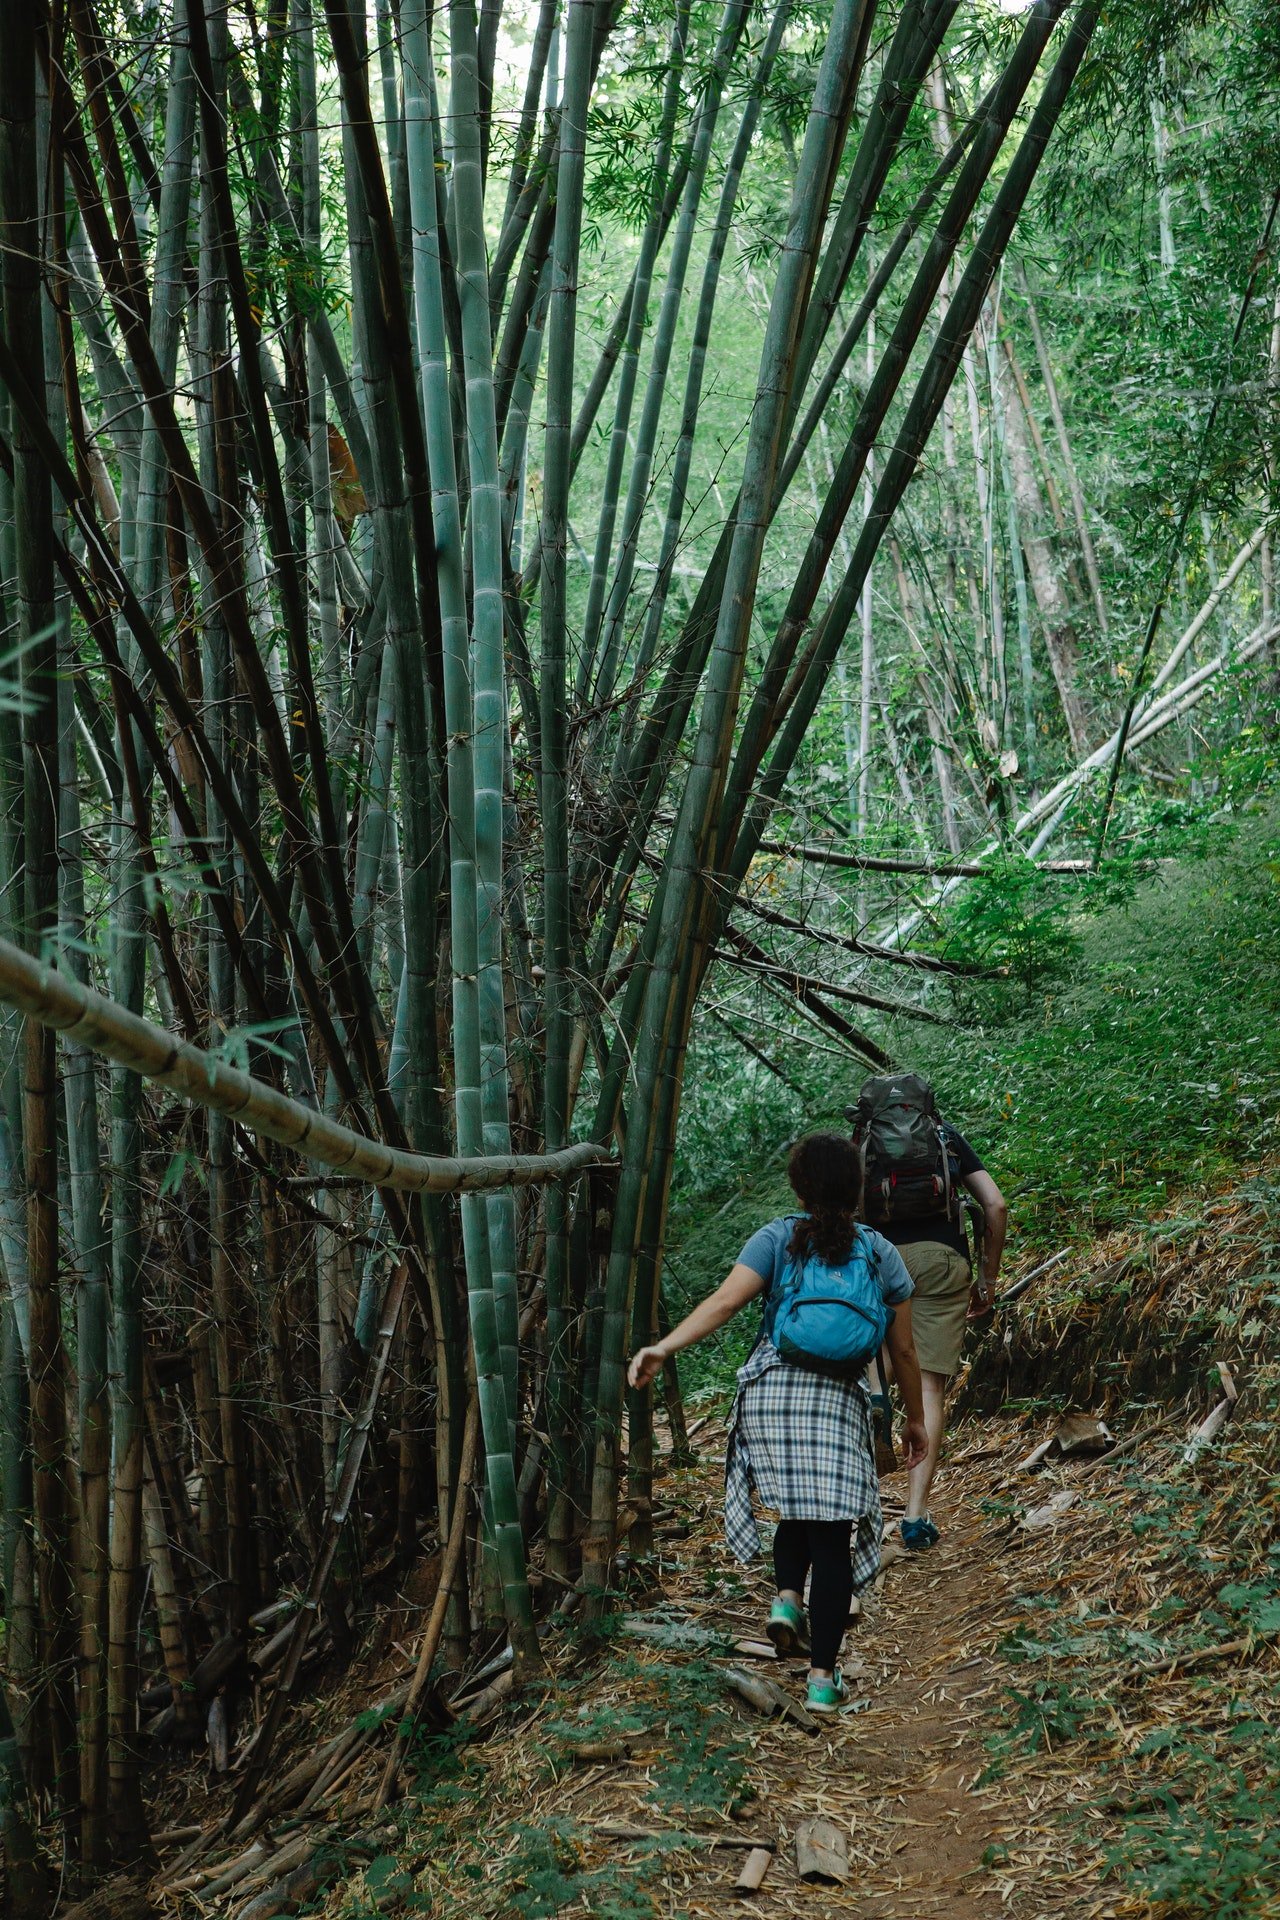 Woman hiking in a park | Source: Pexels